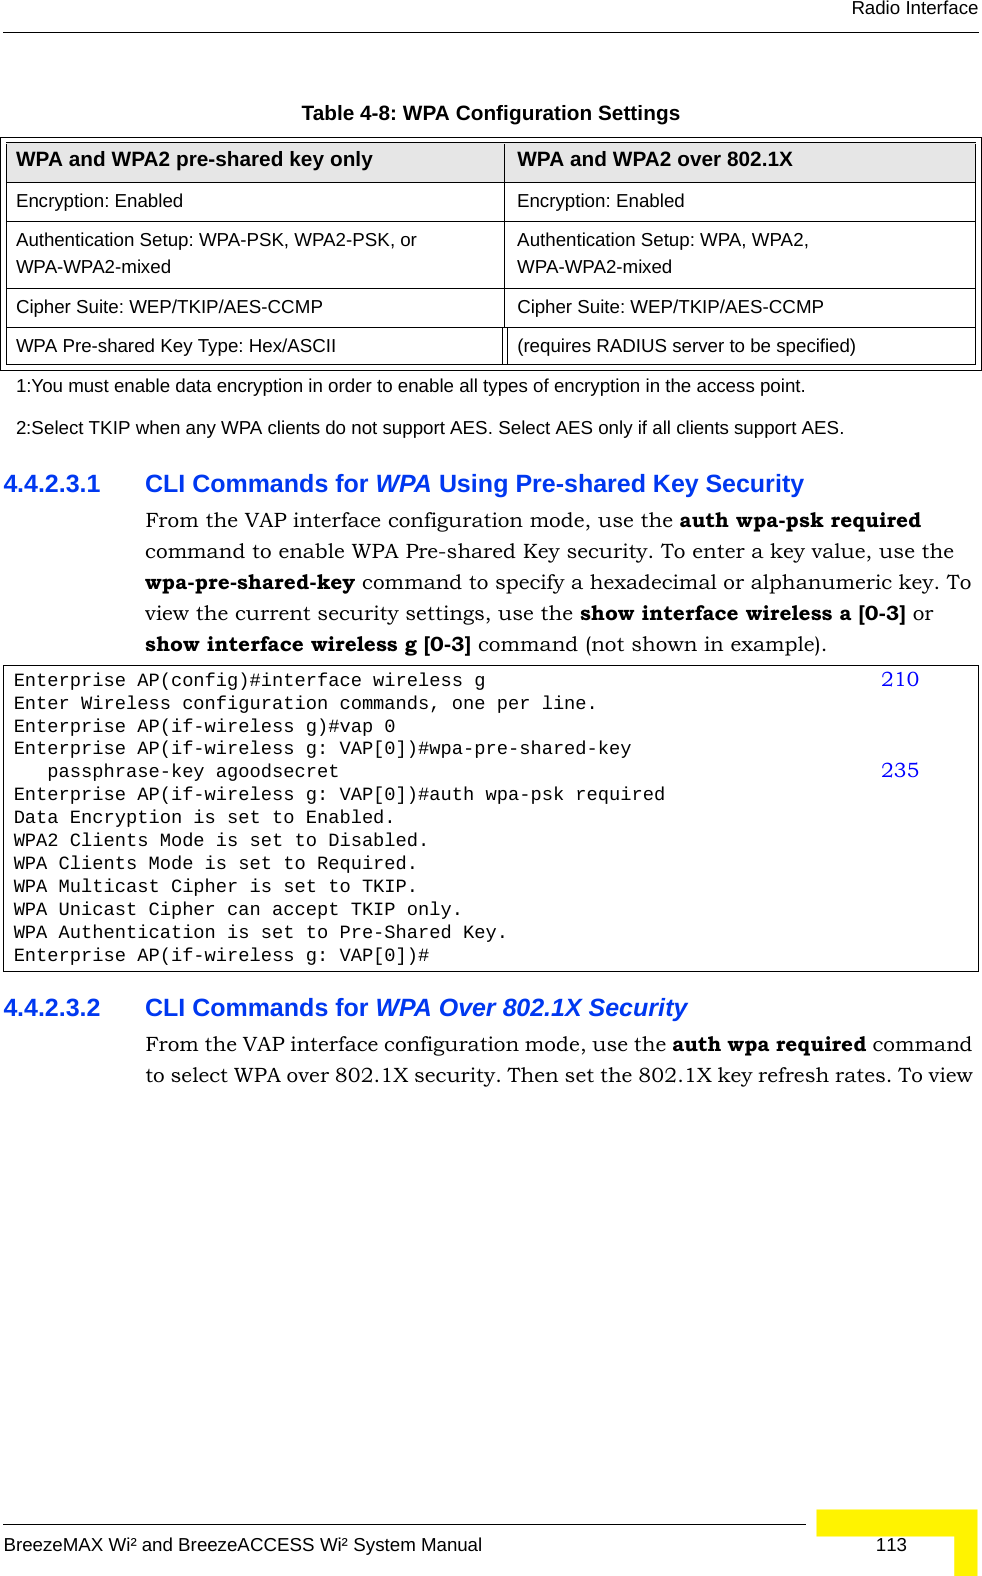 Radio InterfaceBreezeMAX Wi² and BreezeACCESS Wi² System Manual  1134.4.2.3.1 CLI Commands for WPA Using Pre-shared Key Security From the VAP interface configuration mode, use the auth wpa-psk required command to enable WPA Pre-shared Key security. To enter a key value, use the wpa-pre-shared-key command to specify a hexadecimal or alphanumeric key. To view the current security settings, use the show interface wireless a [0-3] or show interface wireless g [0-3] command (not shown in example).4.4.2.3.2 CLI Commands for WPA Over 802.1X SecurityFrom the VAP interface configuration mode, use the auth wpa required command to select WPA over 802.1X security. Then set the 802.1X key refresh rates. To view Table 4-8: WPA Configuration SettingsWPA and WPA2 pre-shared key only WPA and WPA2 over 802.1XEncryption: Enabled Encryption: EnabledAuthentication Setup: WPA-PSK, WPA2-PSK, or WPA-WPA2-mixedAuthentication Setup: WPA, WPA2, WPA-WPA2-mixedCipher Suite: WEP/TKIP/AES-CCMP Cipher Suite: WEP/TKIP/AES-CCMPWPA Pre-shared Key Type: Hex/ASCII (requires RADIUS server to be specified)1:You must enable data encryption in order to enable all types of encryption in the access point. 2:Select TKIP when any WPA clients do not support AES. Select AES only if all clients support AES.Enterprise AP(config)#interface wireless g 210Enter Wireless configuration commands, one per line.Enterprise AP(if-wireless g)#vap 0Enterprise AP(if-wireless g: VAP[0])#wpa-pre-shared-key    passphrase-key agoodsecret 235Enterprise AP(if-wireless g: VAP[0])#auth wpa-psk requiredData Encryption is set to Enabled.WPA2 Clients Mode is set to Disabled.WPA Clients Mode is set to Required.WPA Multicast Cipher is set to TKIP.WPA Unicast Cipher can accept TKIP only.WPA Authentication is set to Pre-Shared Key.Enterprise AP(if-wireless g: VAP[0])#